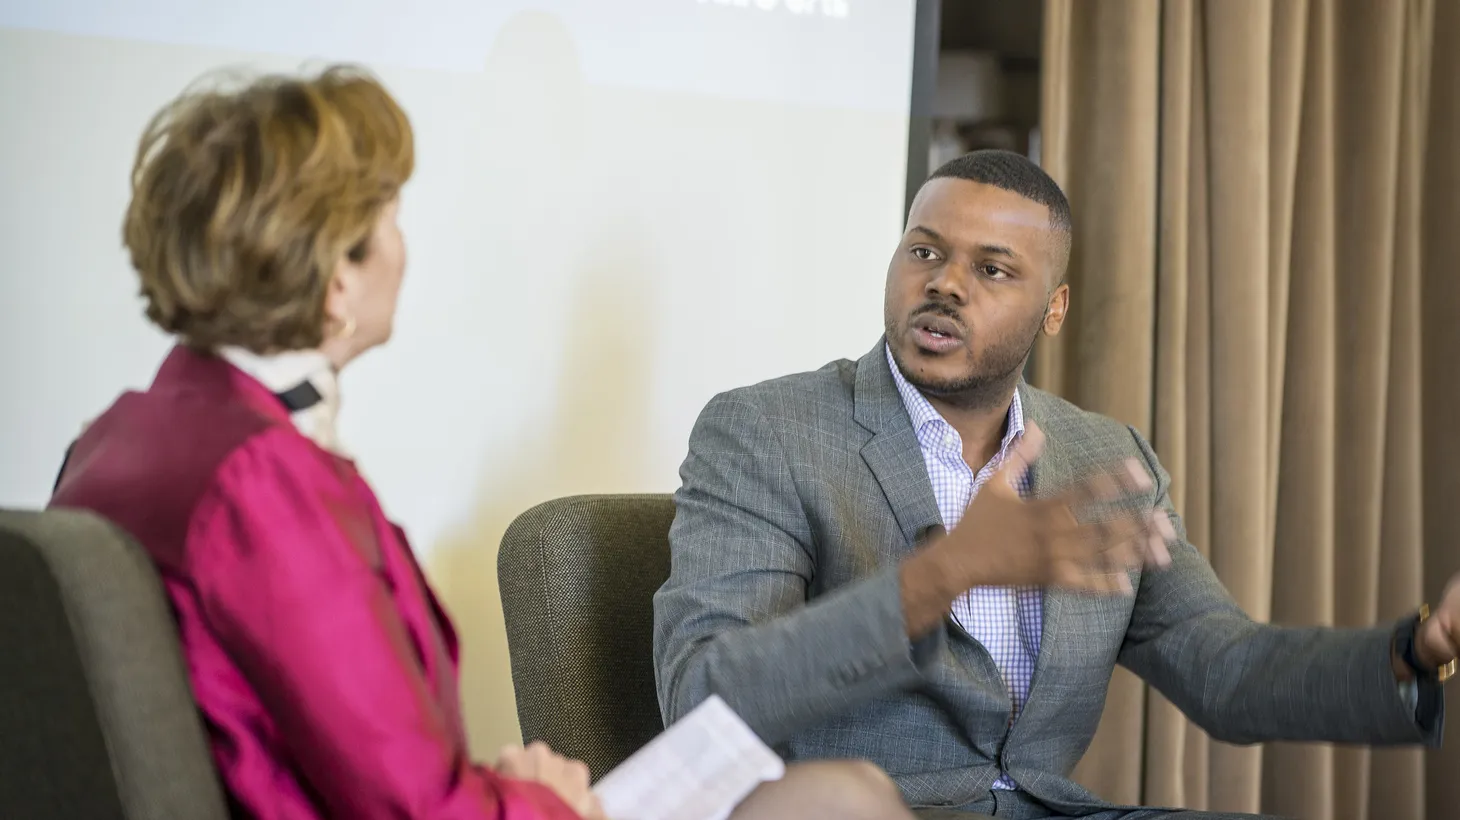 When Michael Tubbs was the mayor of Stockton, he was among the first civic leaders in the country to experiment with universal basic income. He says bold initiatives are needed to lift up the 15% of Californians who live below the poverty line.